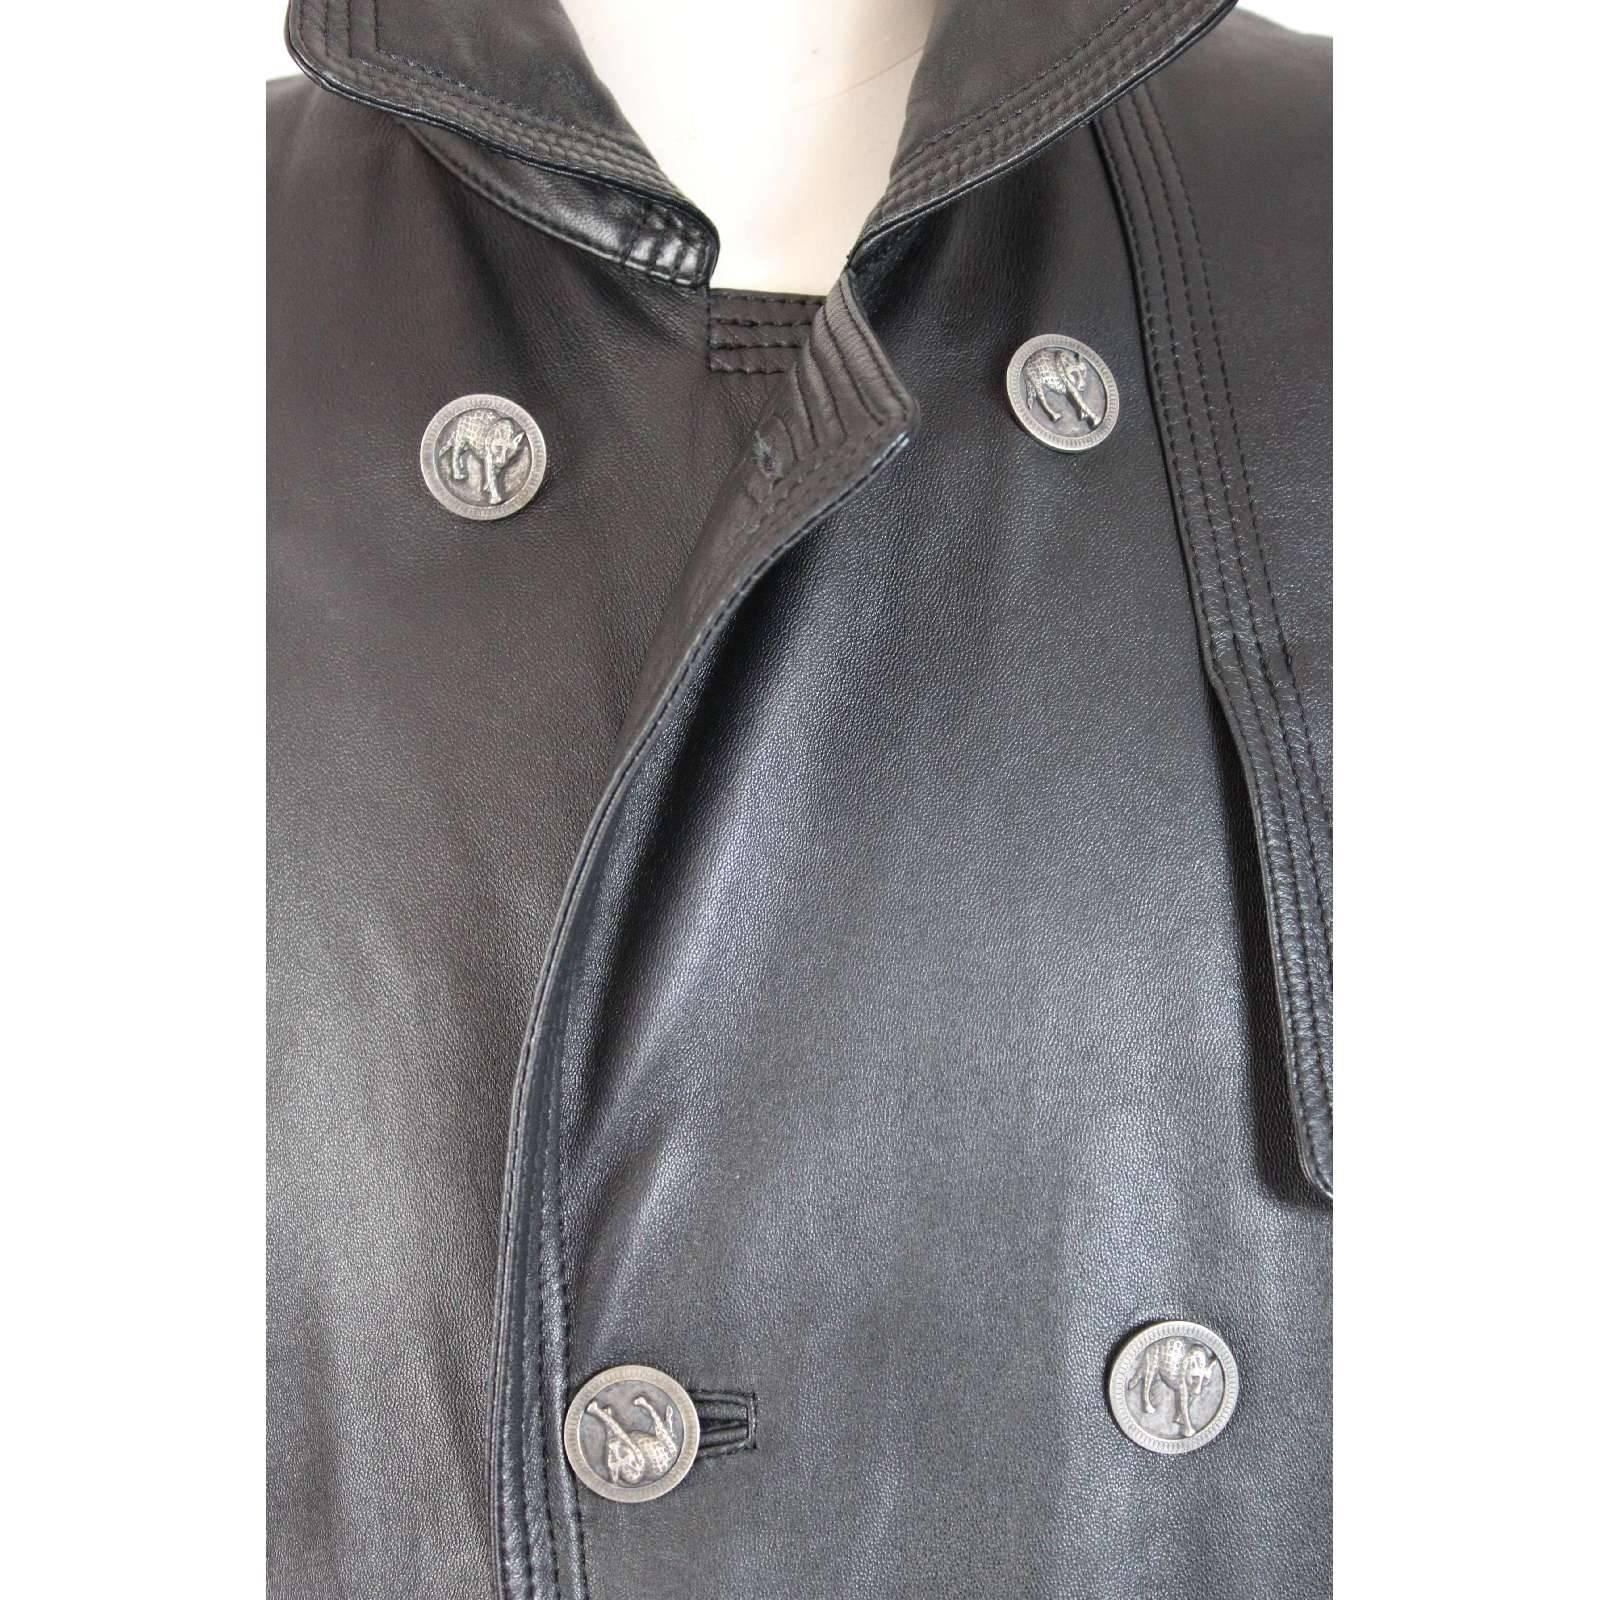 Versus Gianni Versace black leather motorcycle raincoat trench coat size 38/52 In Excellent Condition For Sale In Brindisi, IT